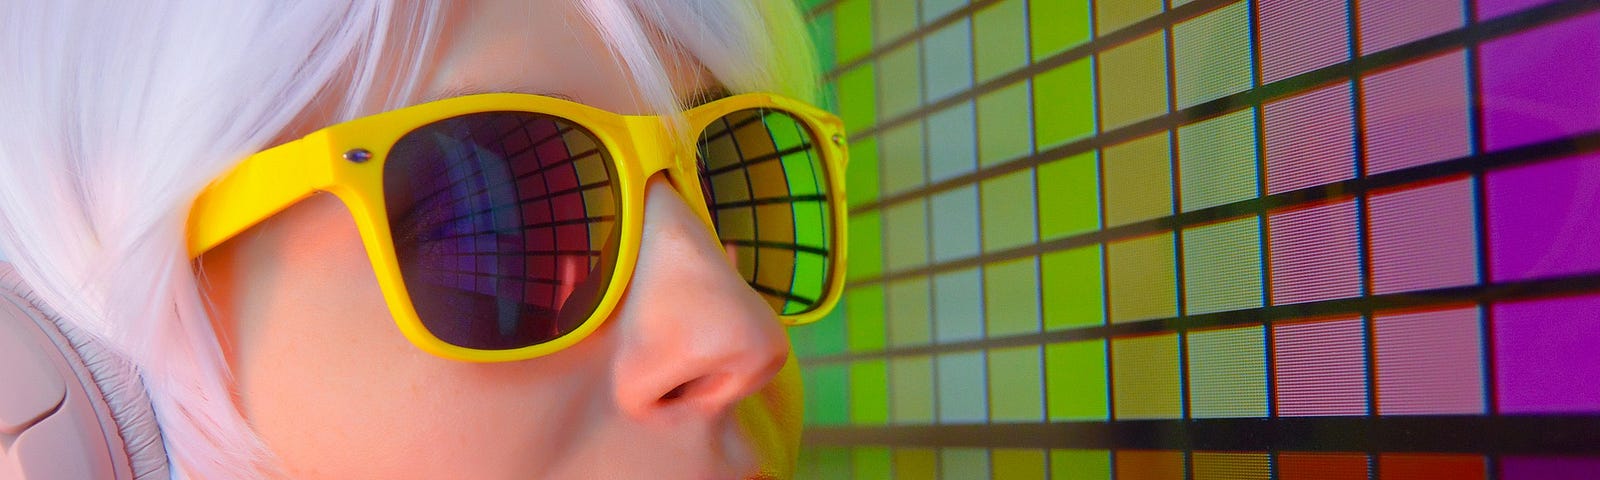 woman in yellow sunglasses facing a colorboard of lights